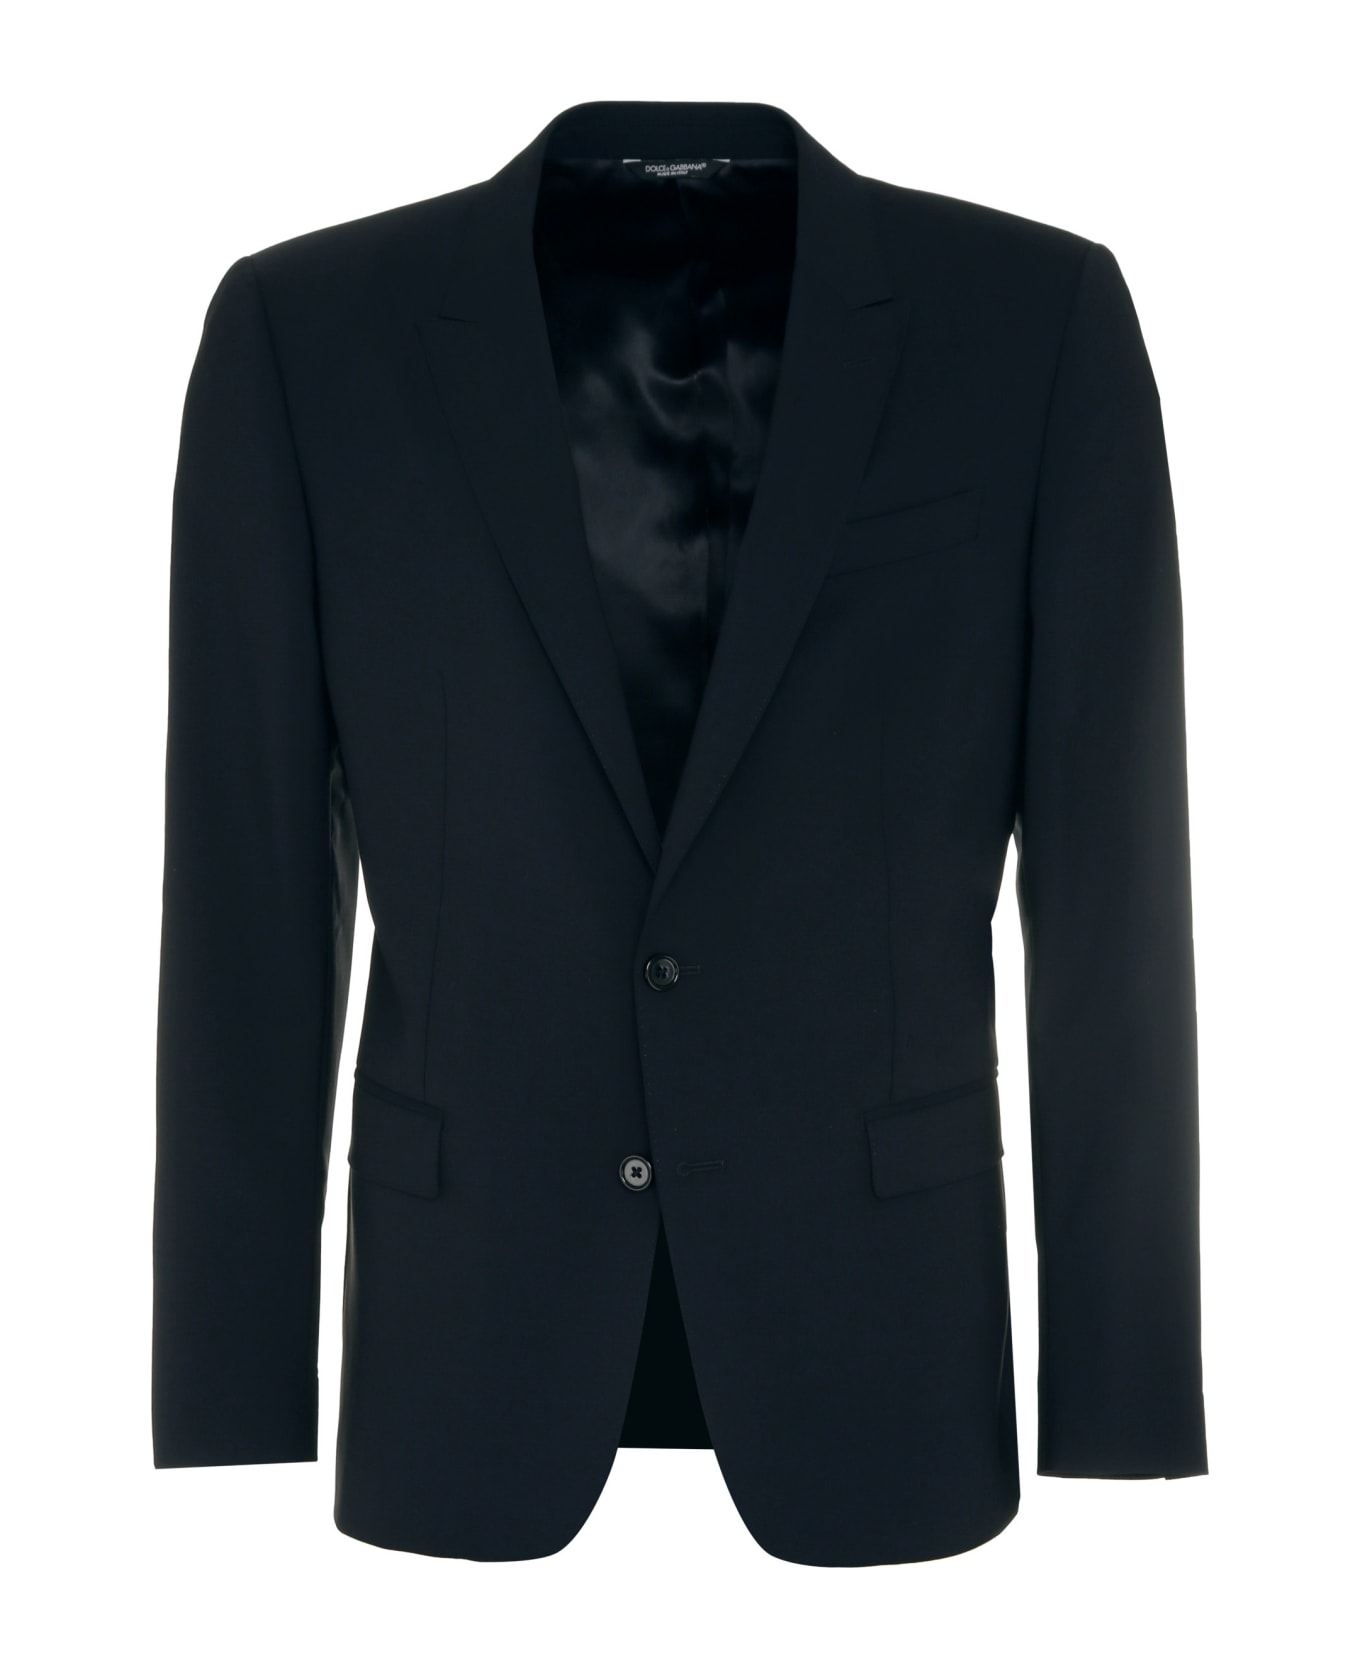 Dolce & Gabbana Stretch Wool Two-pieces Suit - BLU SCURISSIMO 1